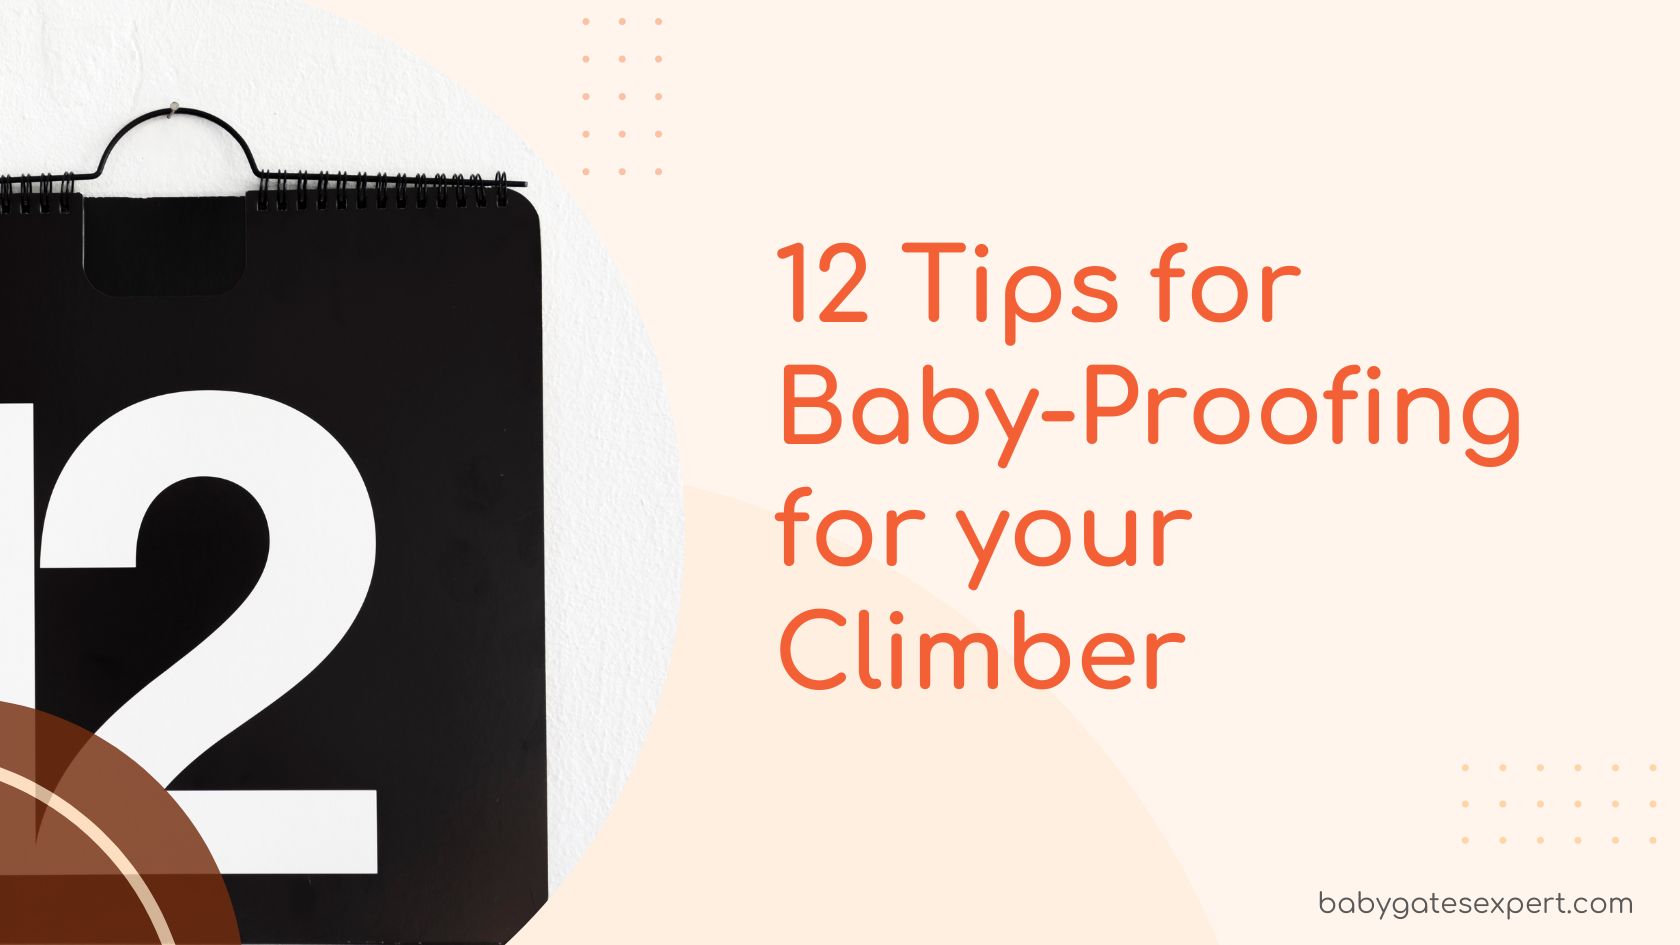 12 Tips for Baby-Proofing for your Climber